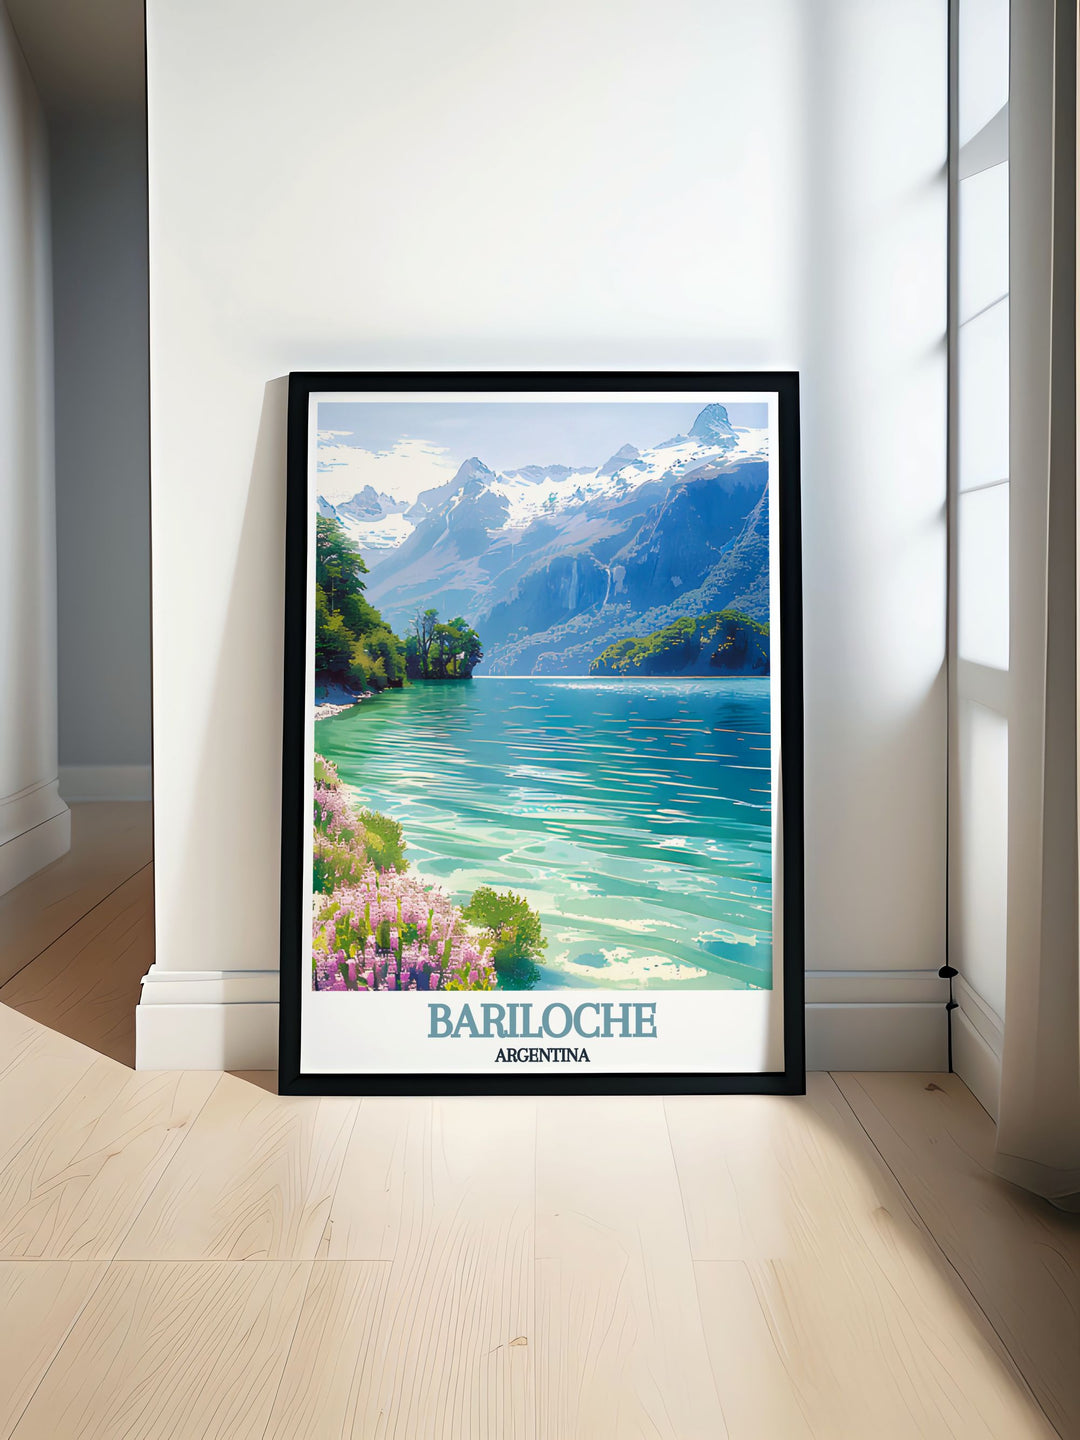 Stunning De Bariloche poster featuring the picturesque Nahuel Huapi Lake and the charming town of San Carlos, capturing the natural beauty and unique charm of this iconic Argentine location. Perfect for adding a touch of Argentinas allure to your home decor.